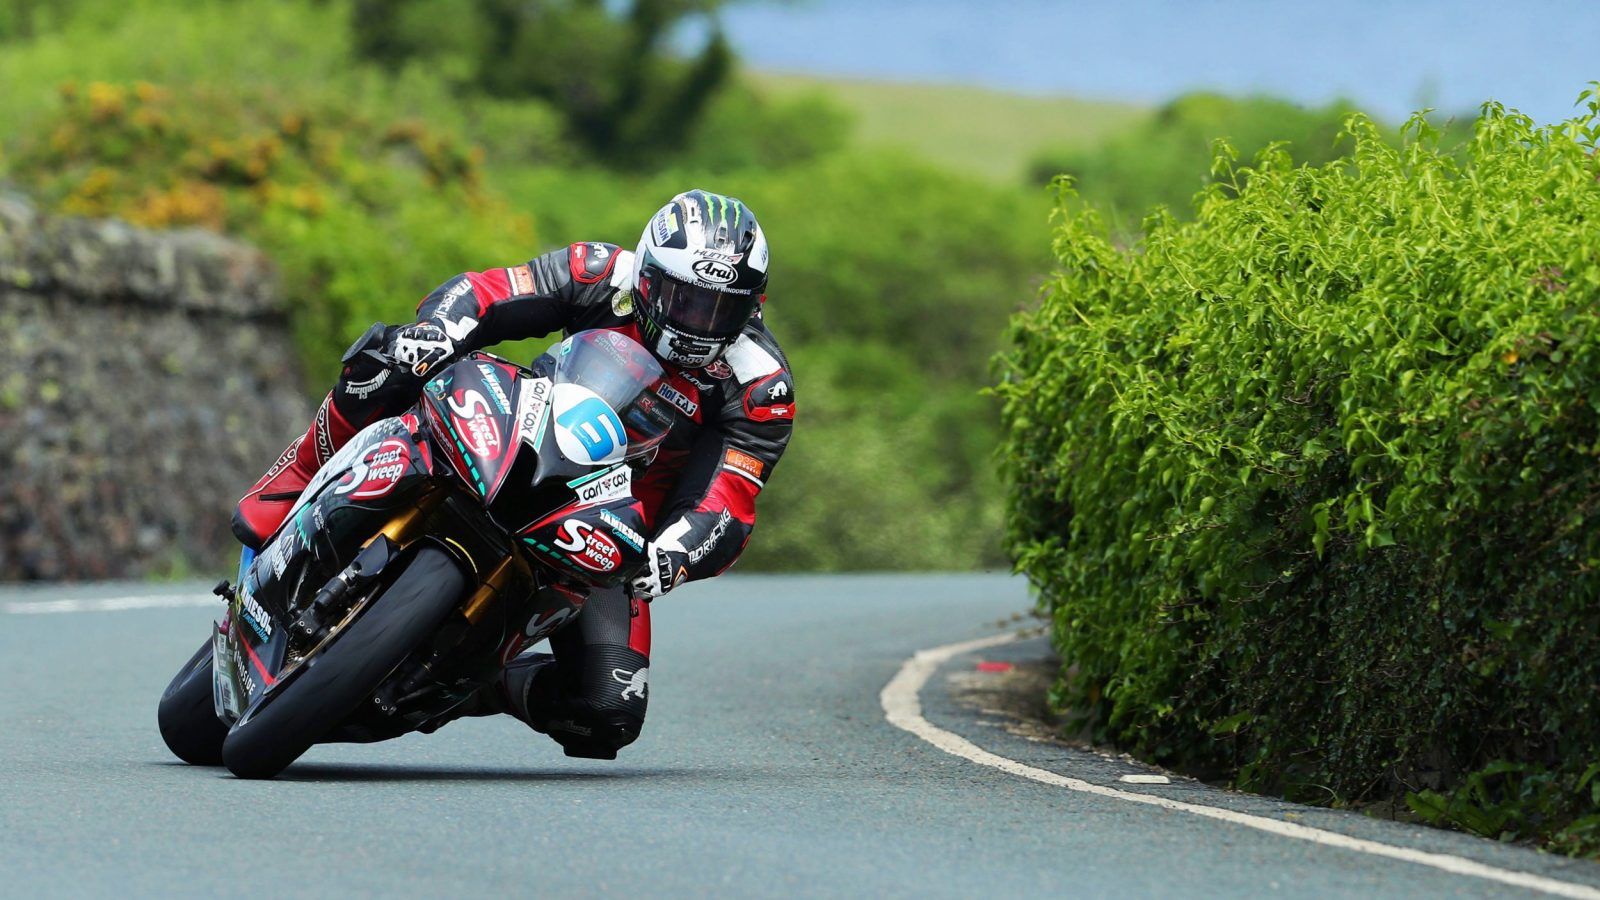 Isle of Man TT races will be halted if drones distract riders